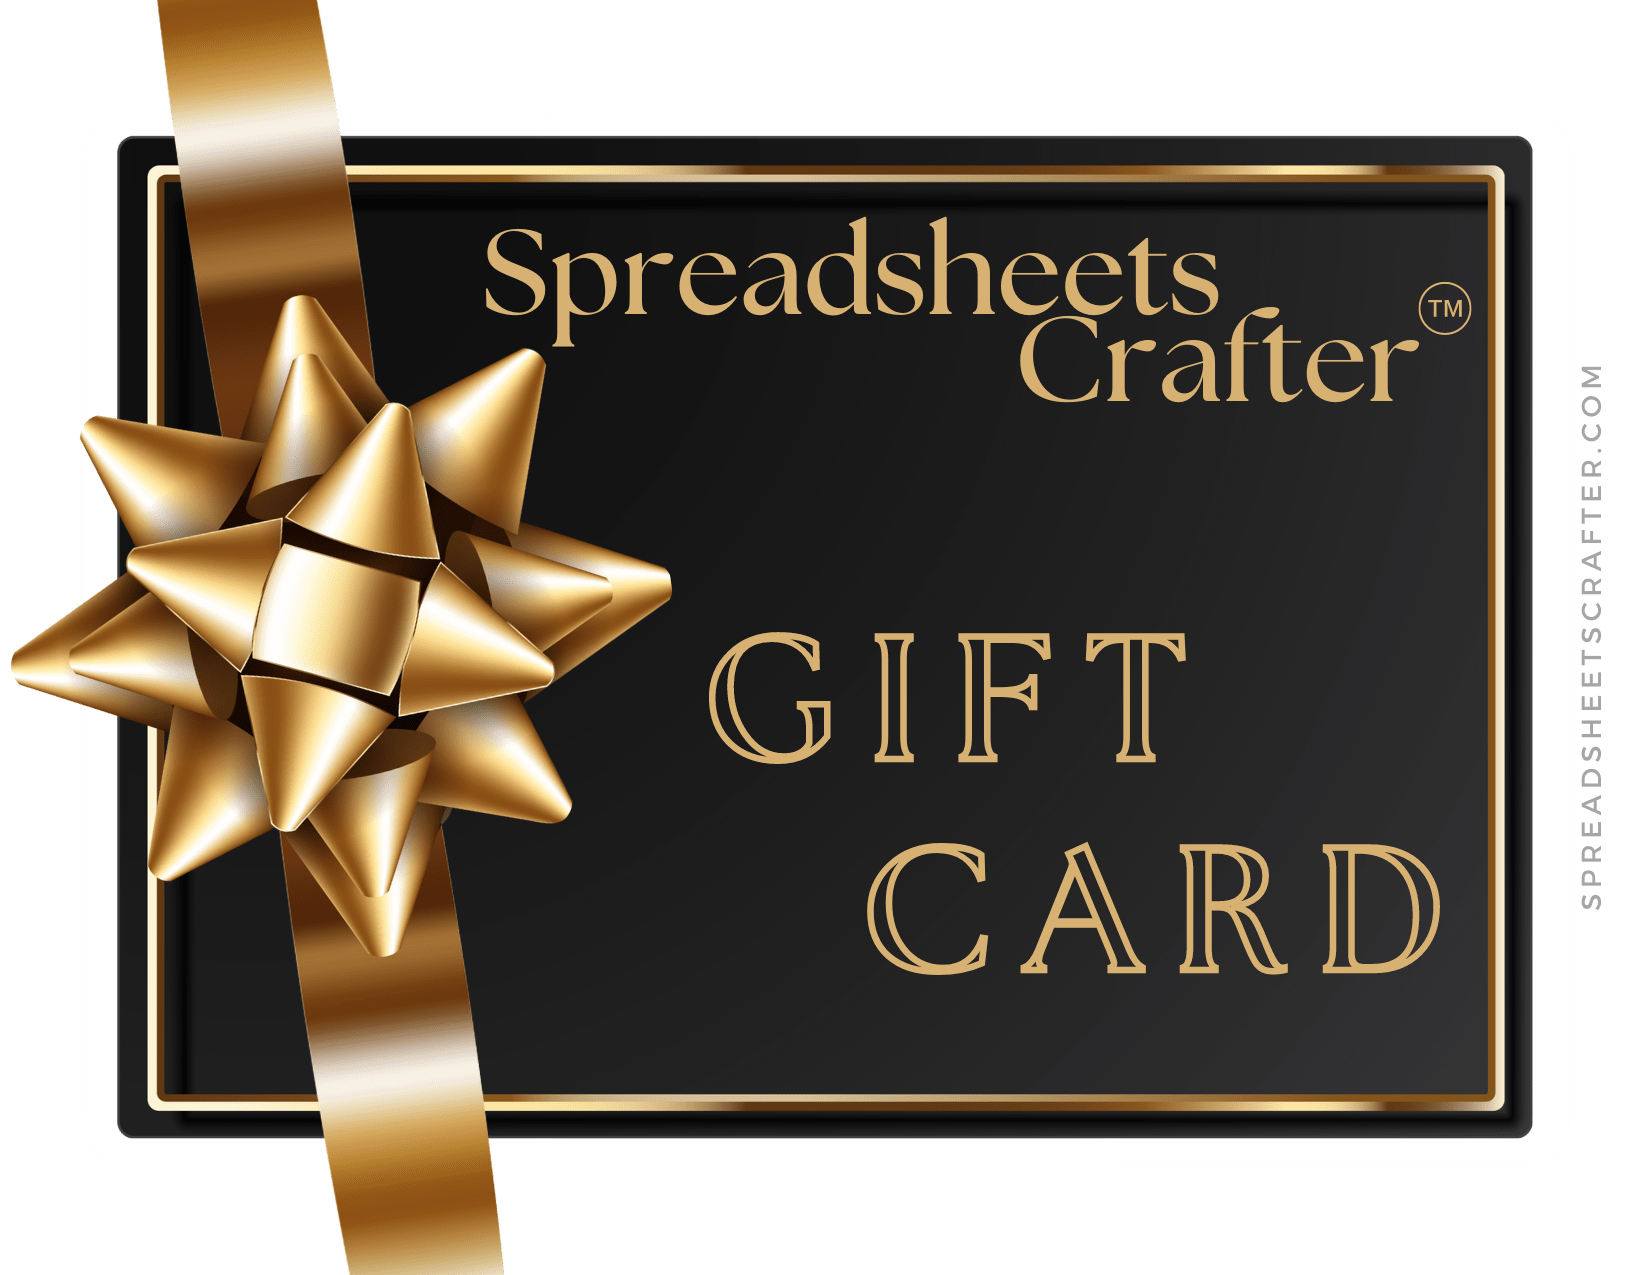 Spreadsheets Crafter Gift Card